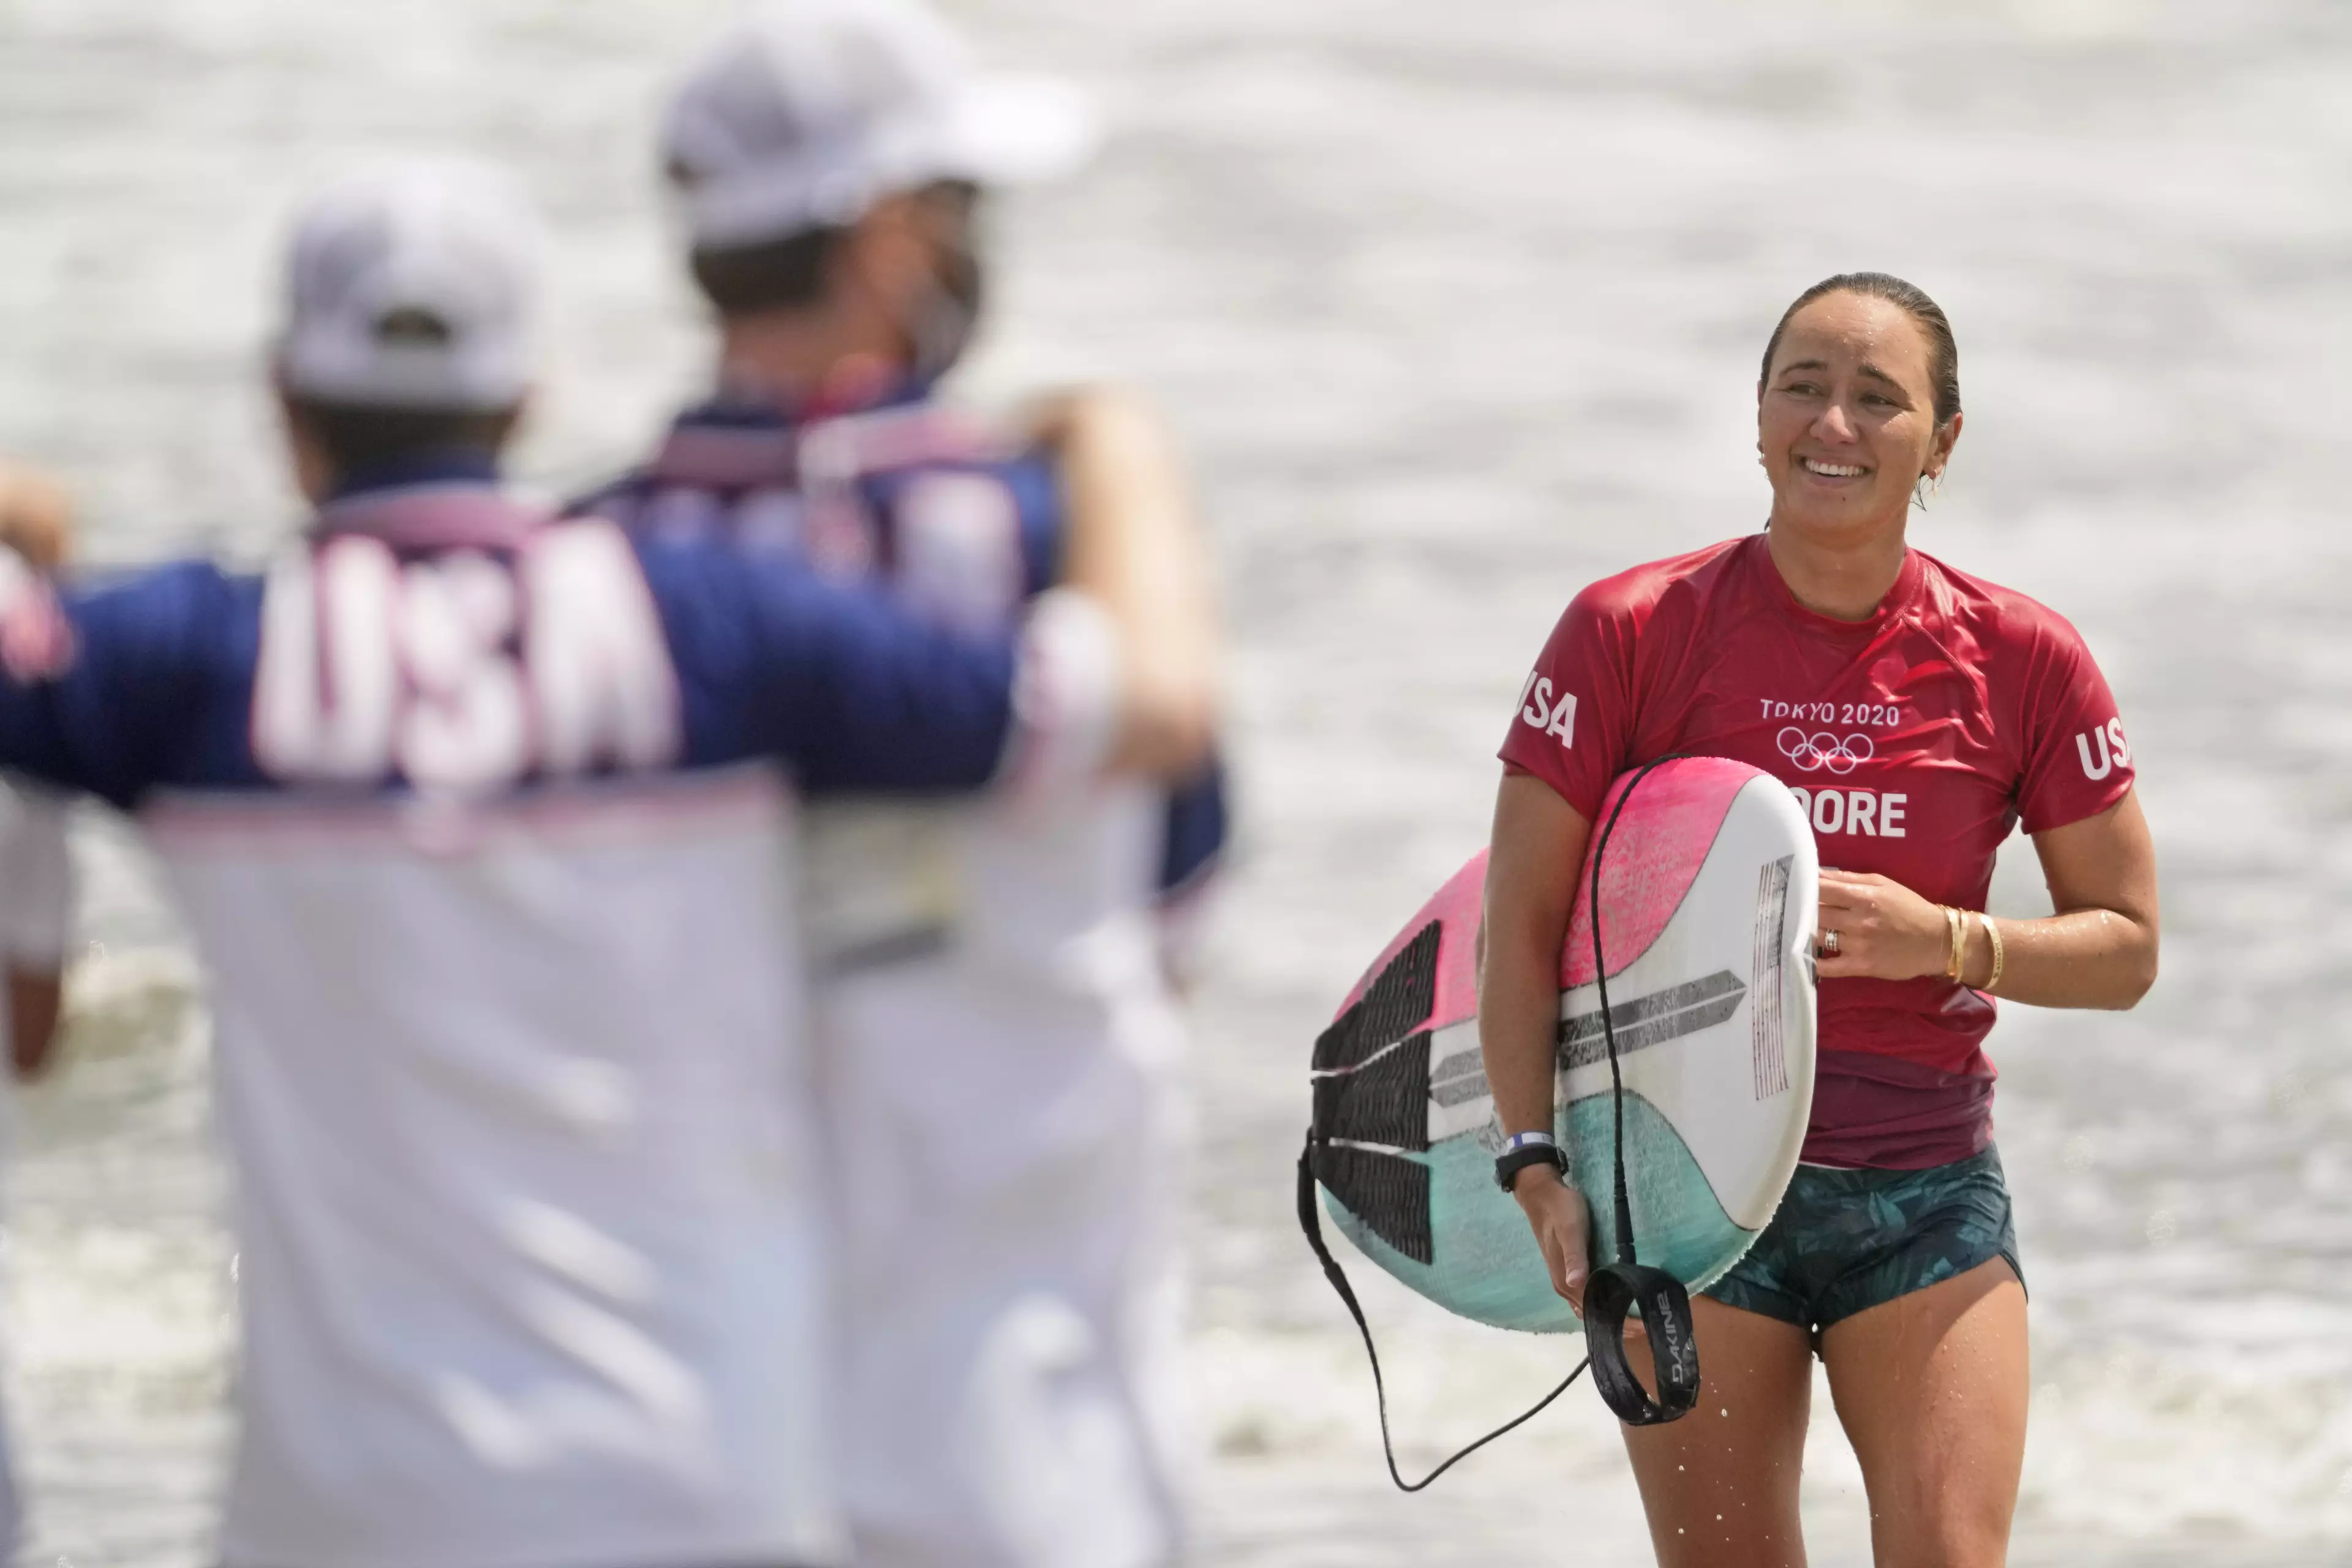 Carissa Moore, of the United States, smiles after wining her heat during third round of women's surfing competition (